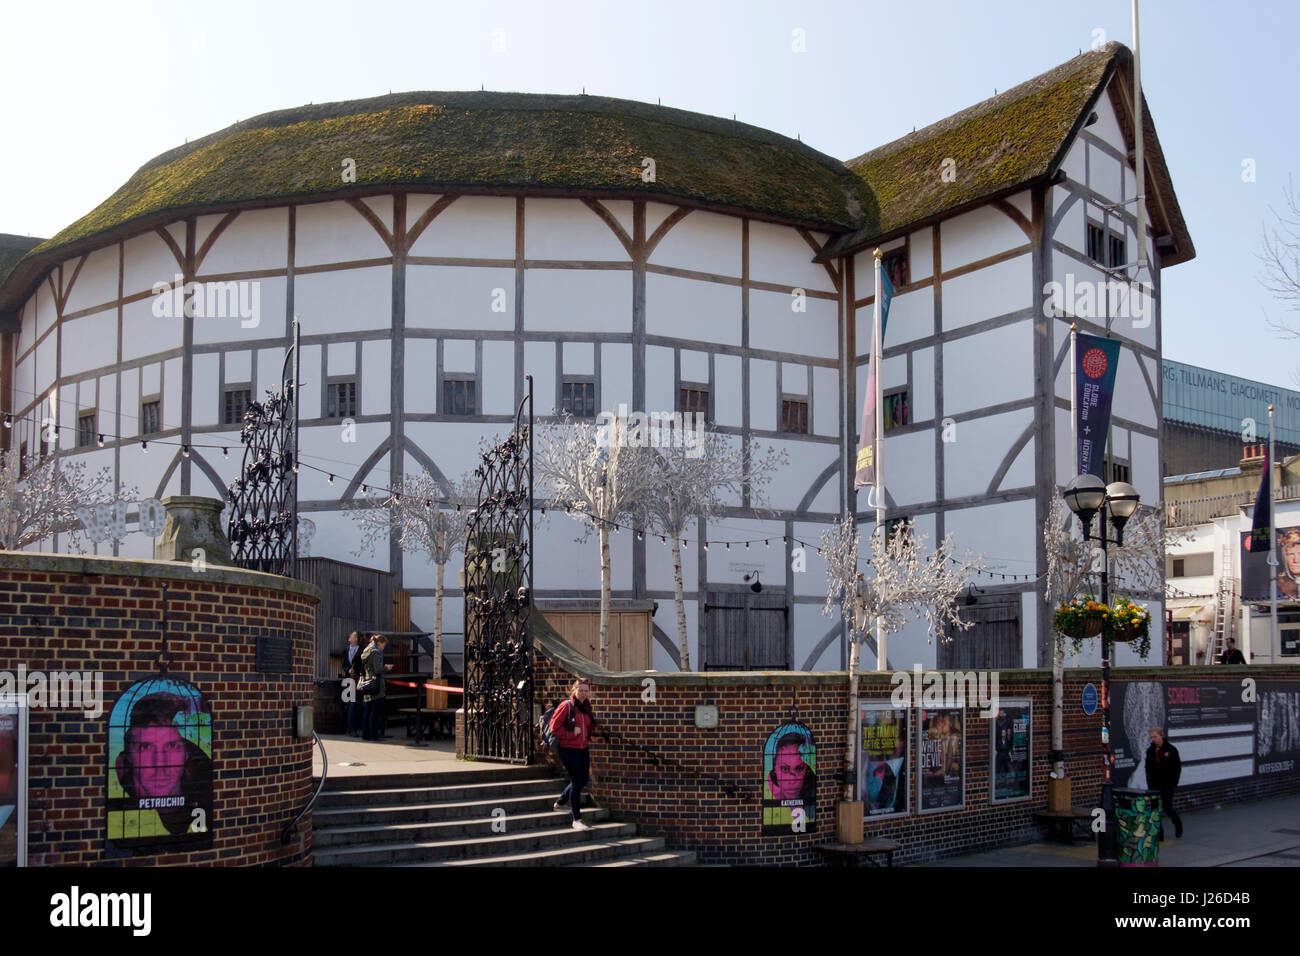 Shakespeare's Globe Theatre on the south bank of the River Thames, London, England, UK, Europe Stock Photo